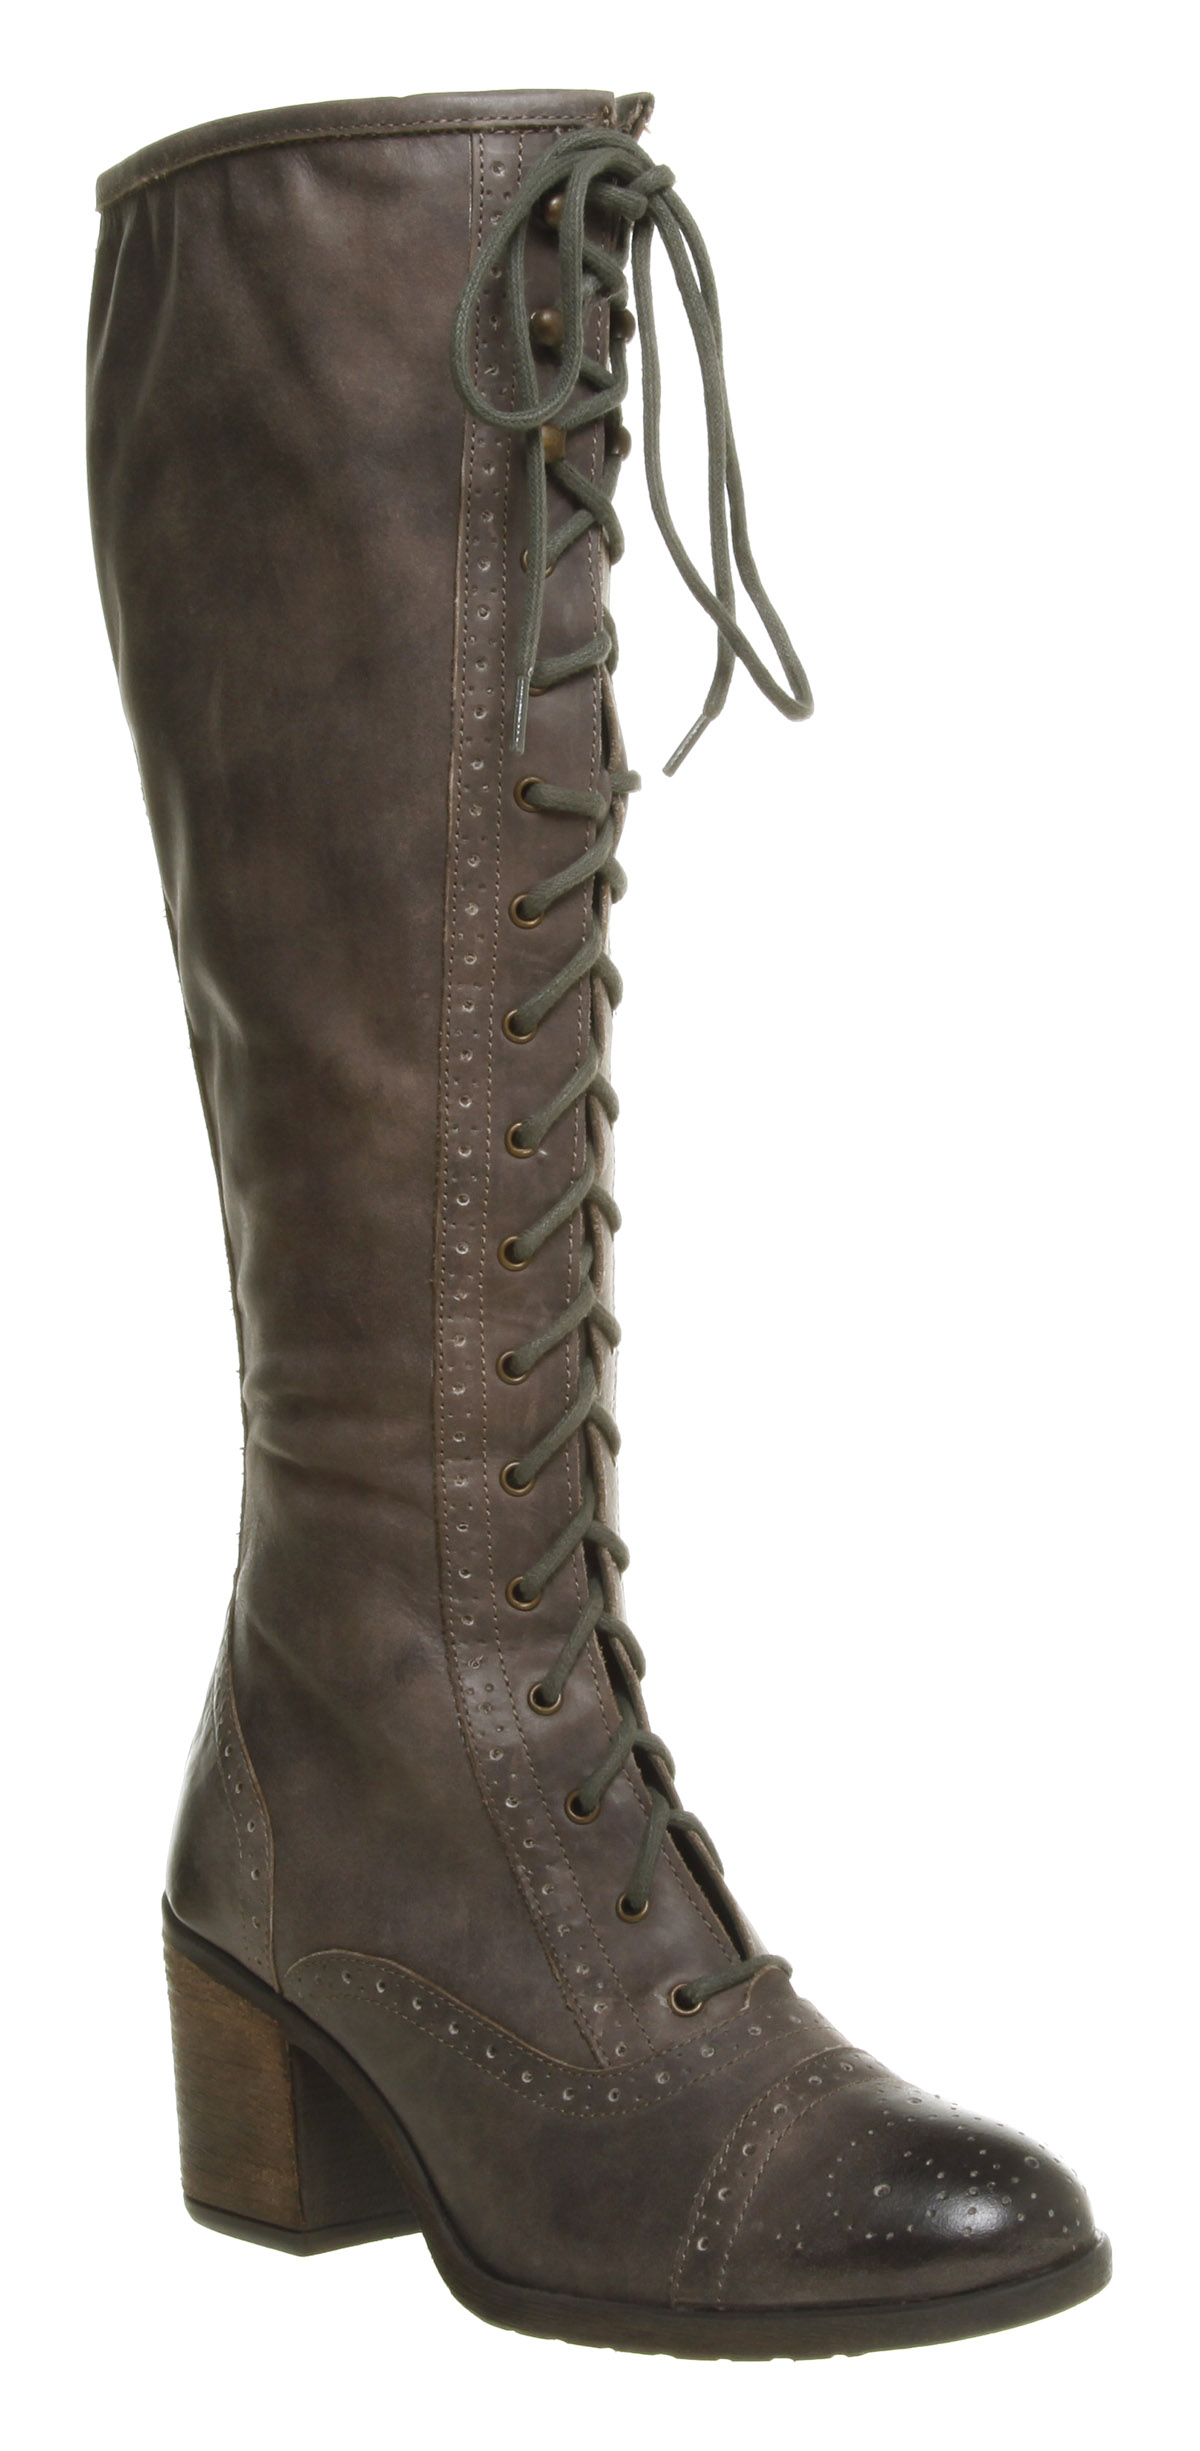 Lyst - Office Judge Brogue Knee Boot Grey Leather in Gray